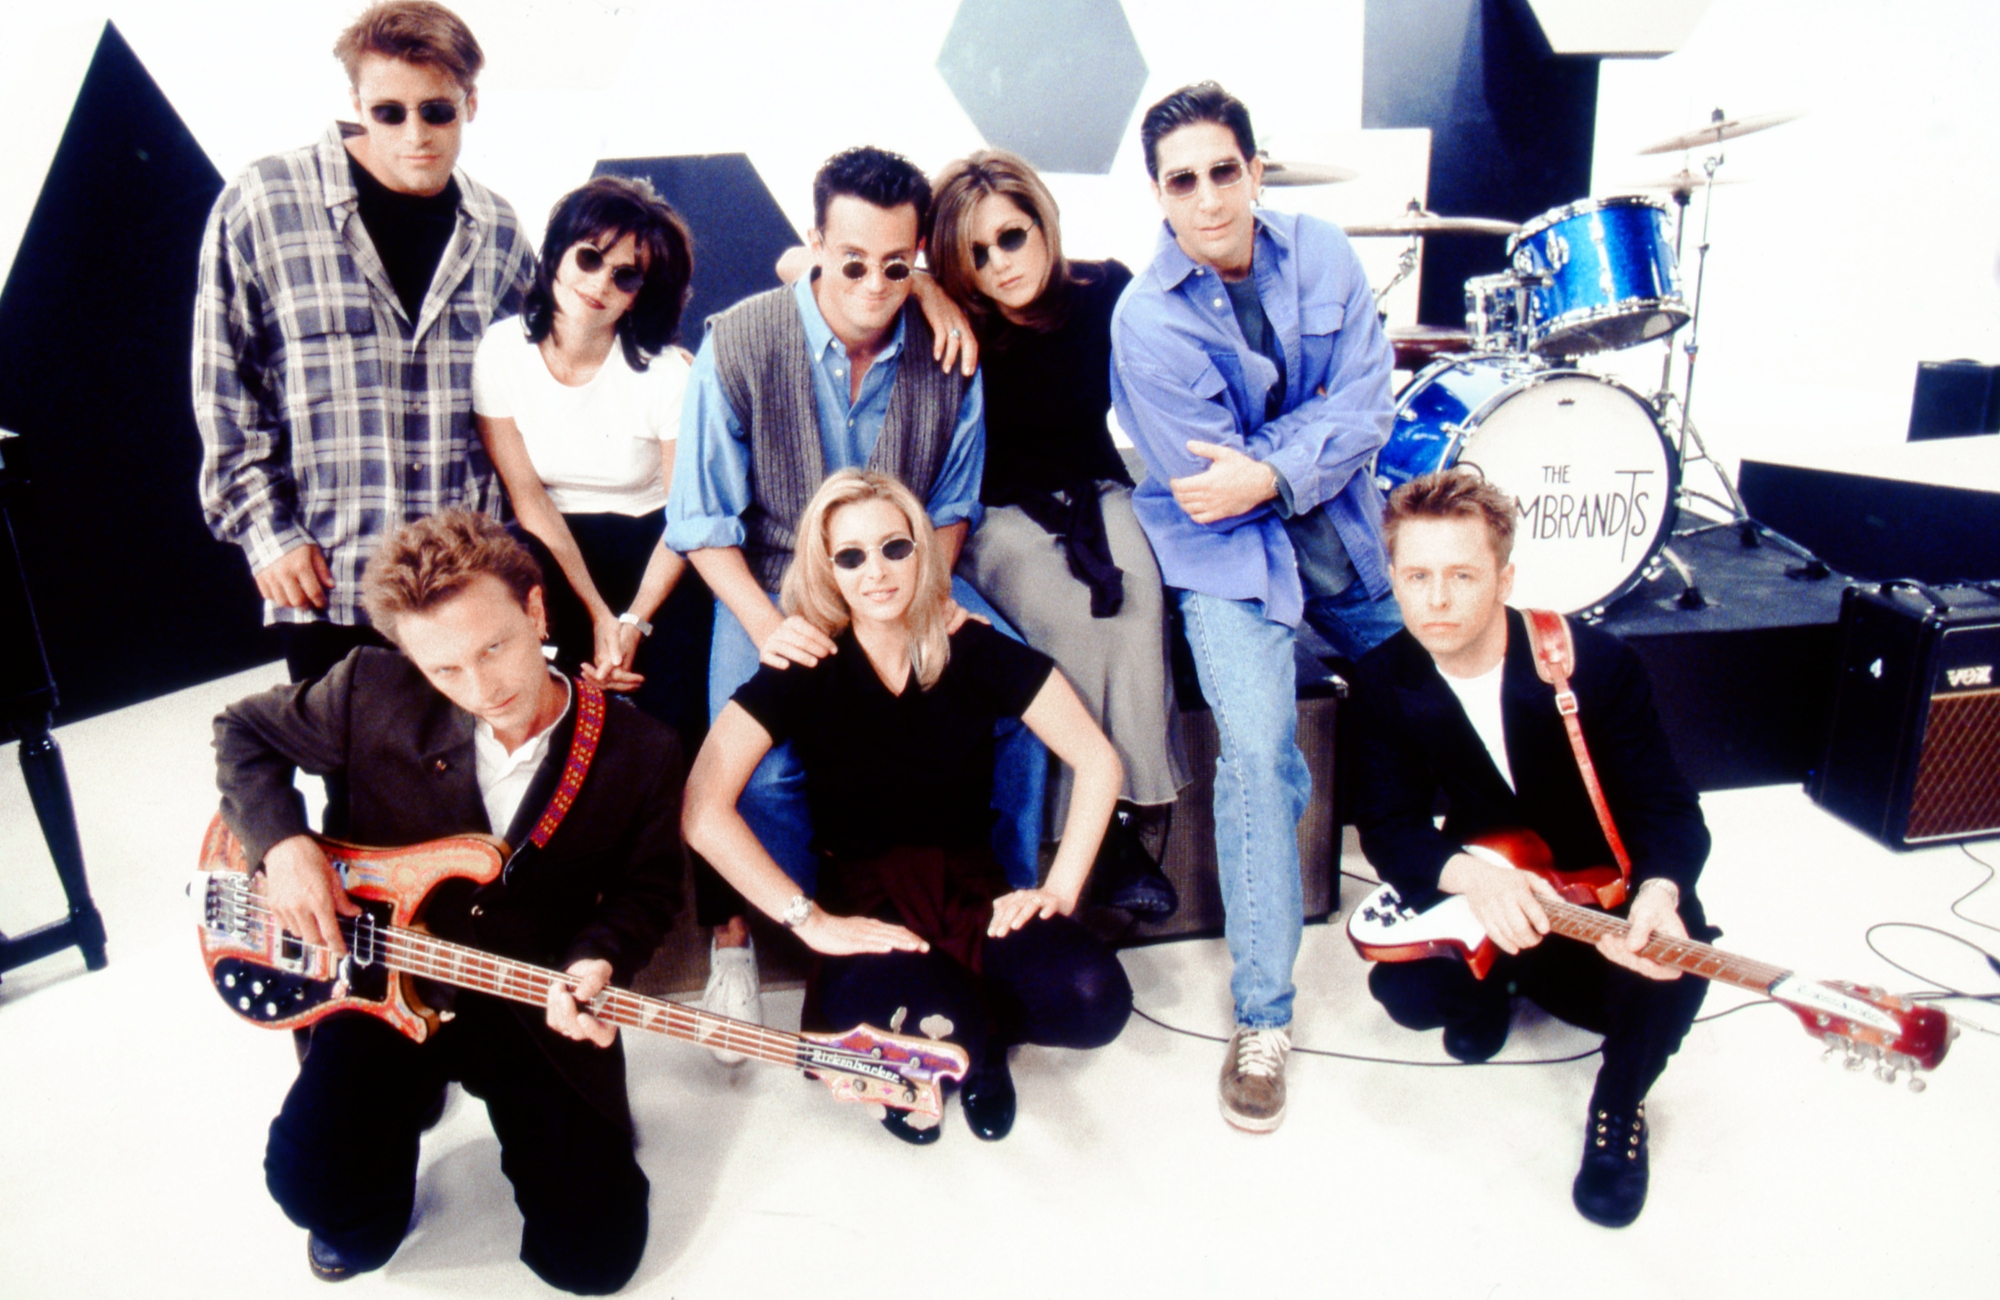 'Friends' opening song, inspired by The Beatles. The Friends cast wearing sunglasses on the set of The Rembrandts music video set.